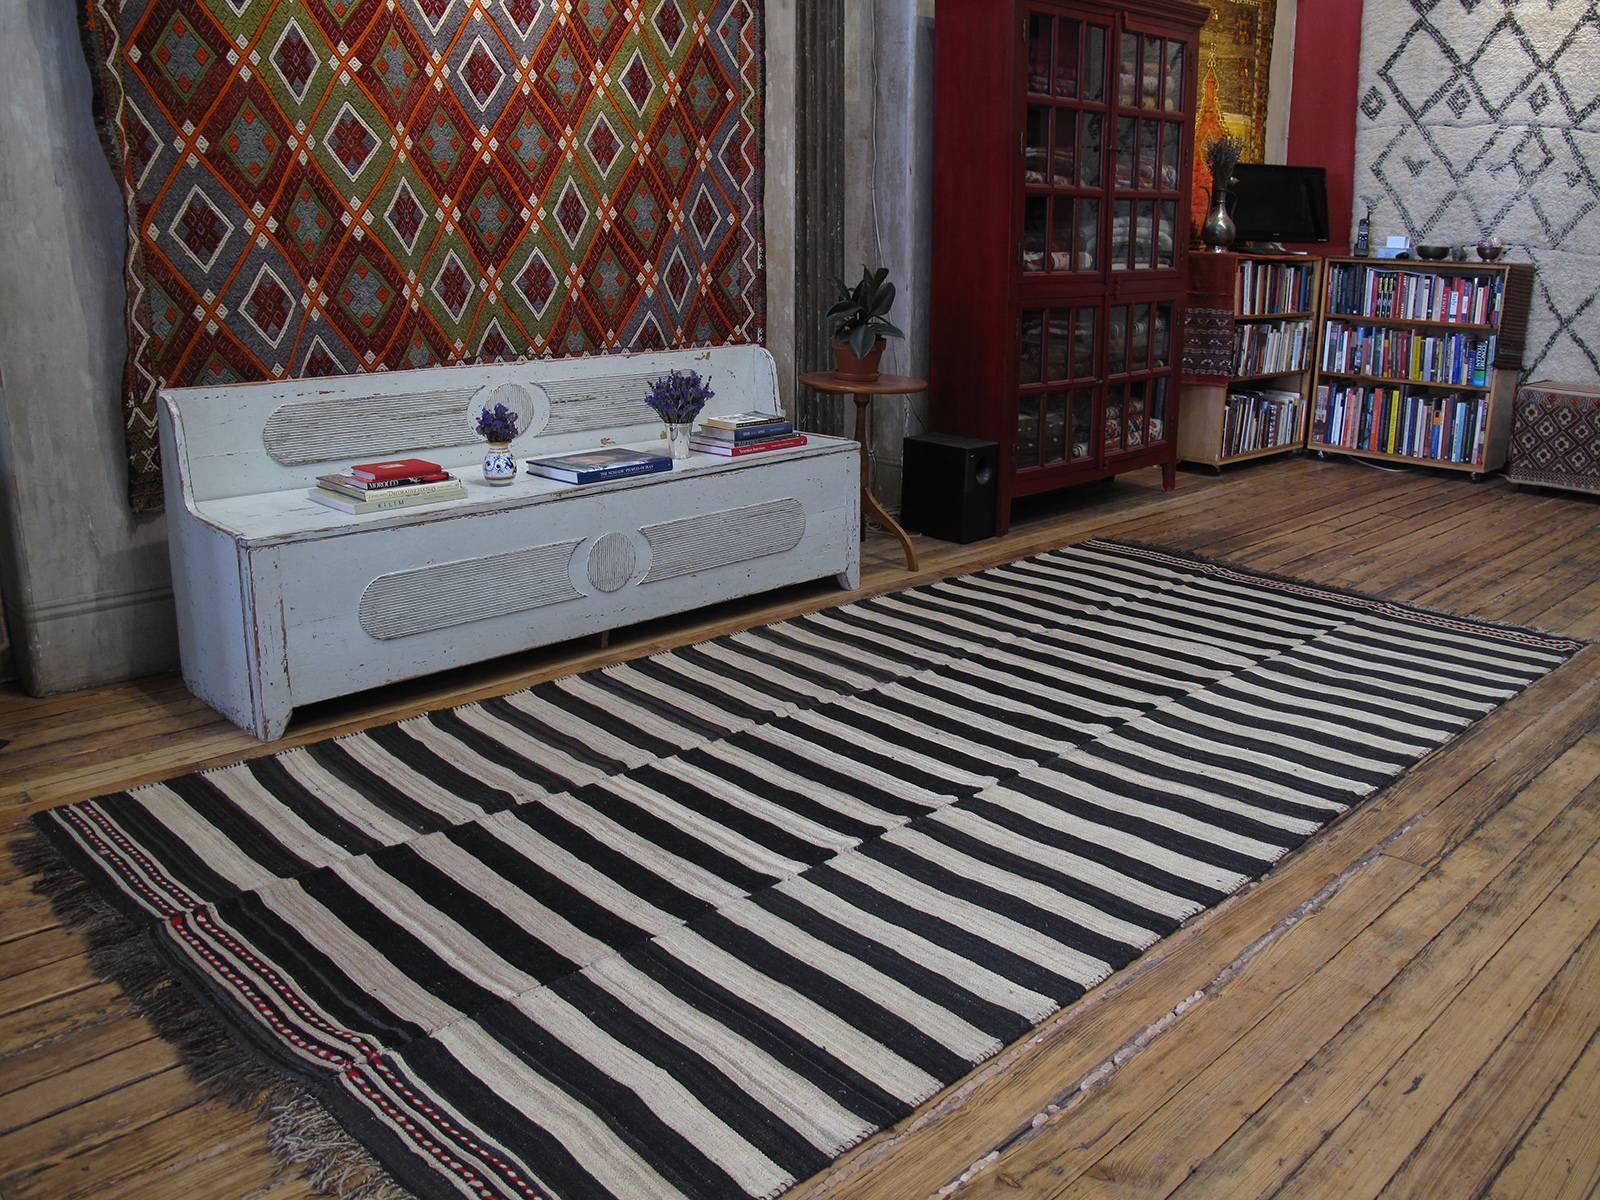 An old tribal flat-weave from Northern Iran, woven in three narrow panels, with alternating bands of ivory and dark brown or black, to be used as a simple everyday floor cover in the weaver's household. A strikingly modern look, with great texture